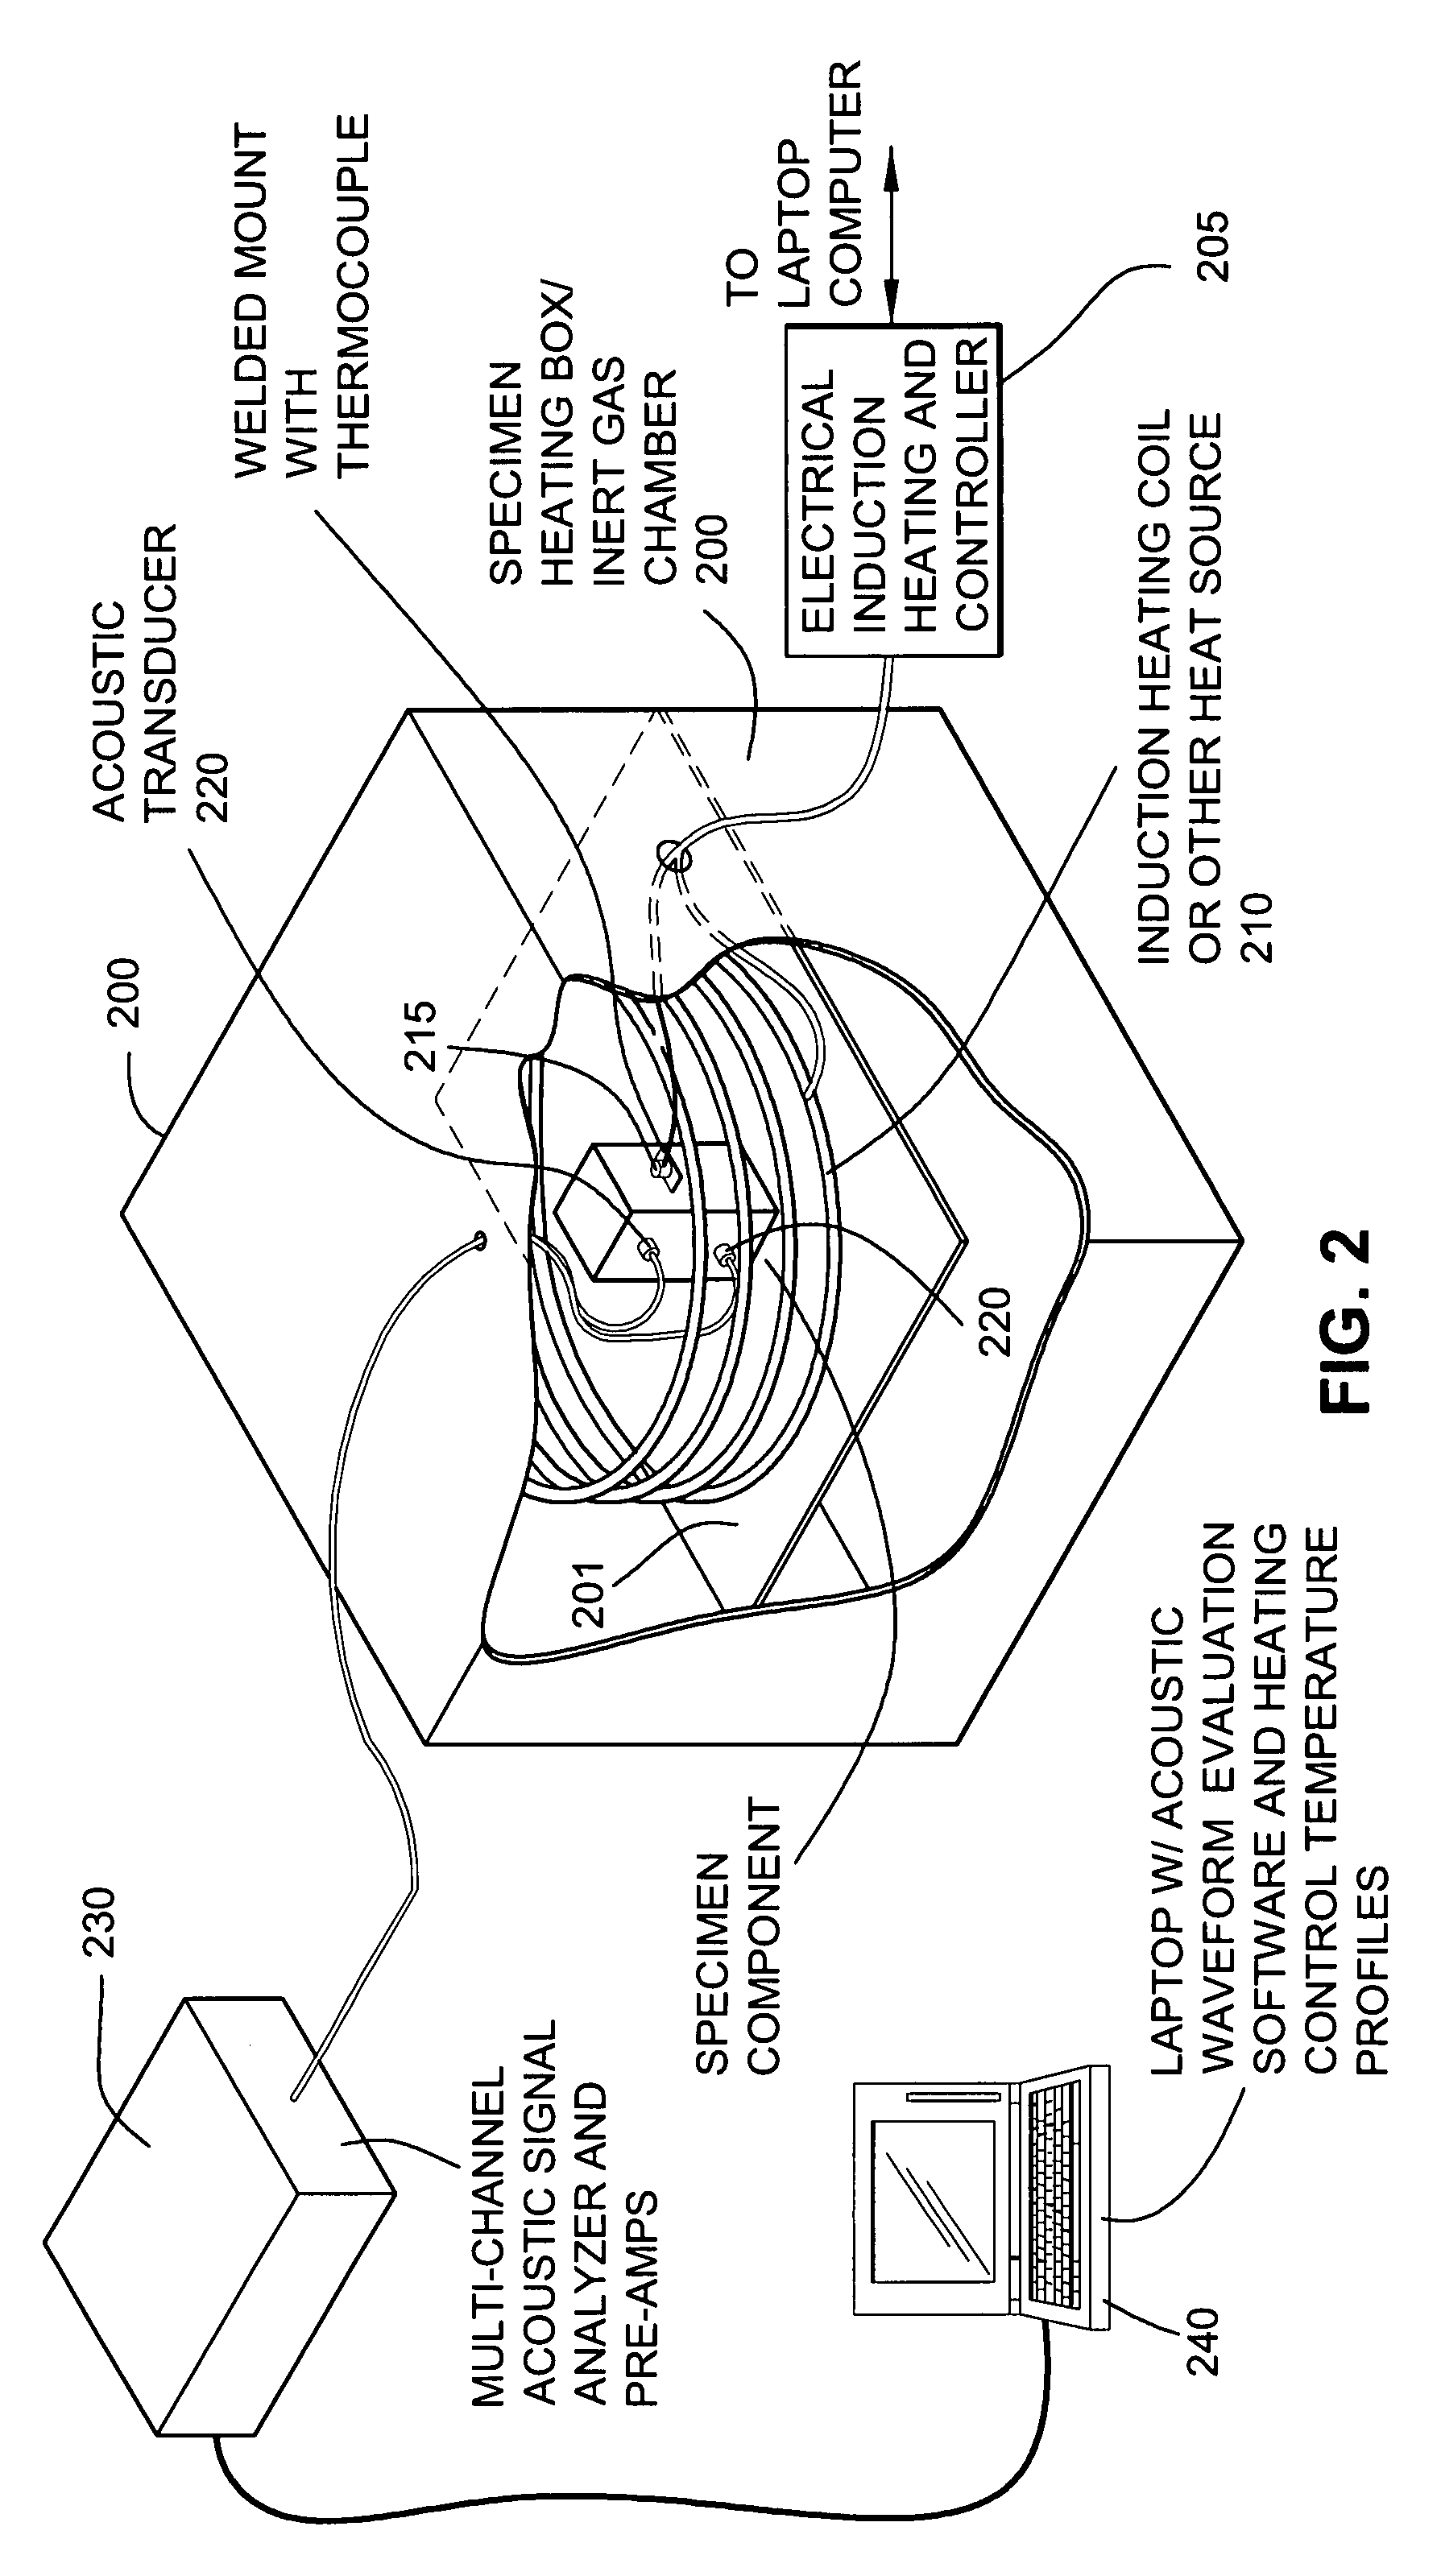 Method and apparatus for testing and evaluating machine components under simulated in-situ thermal operating conditions